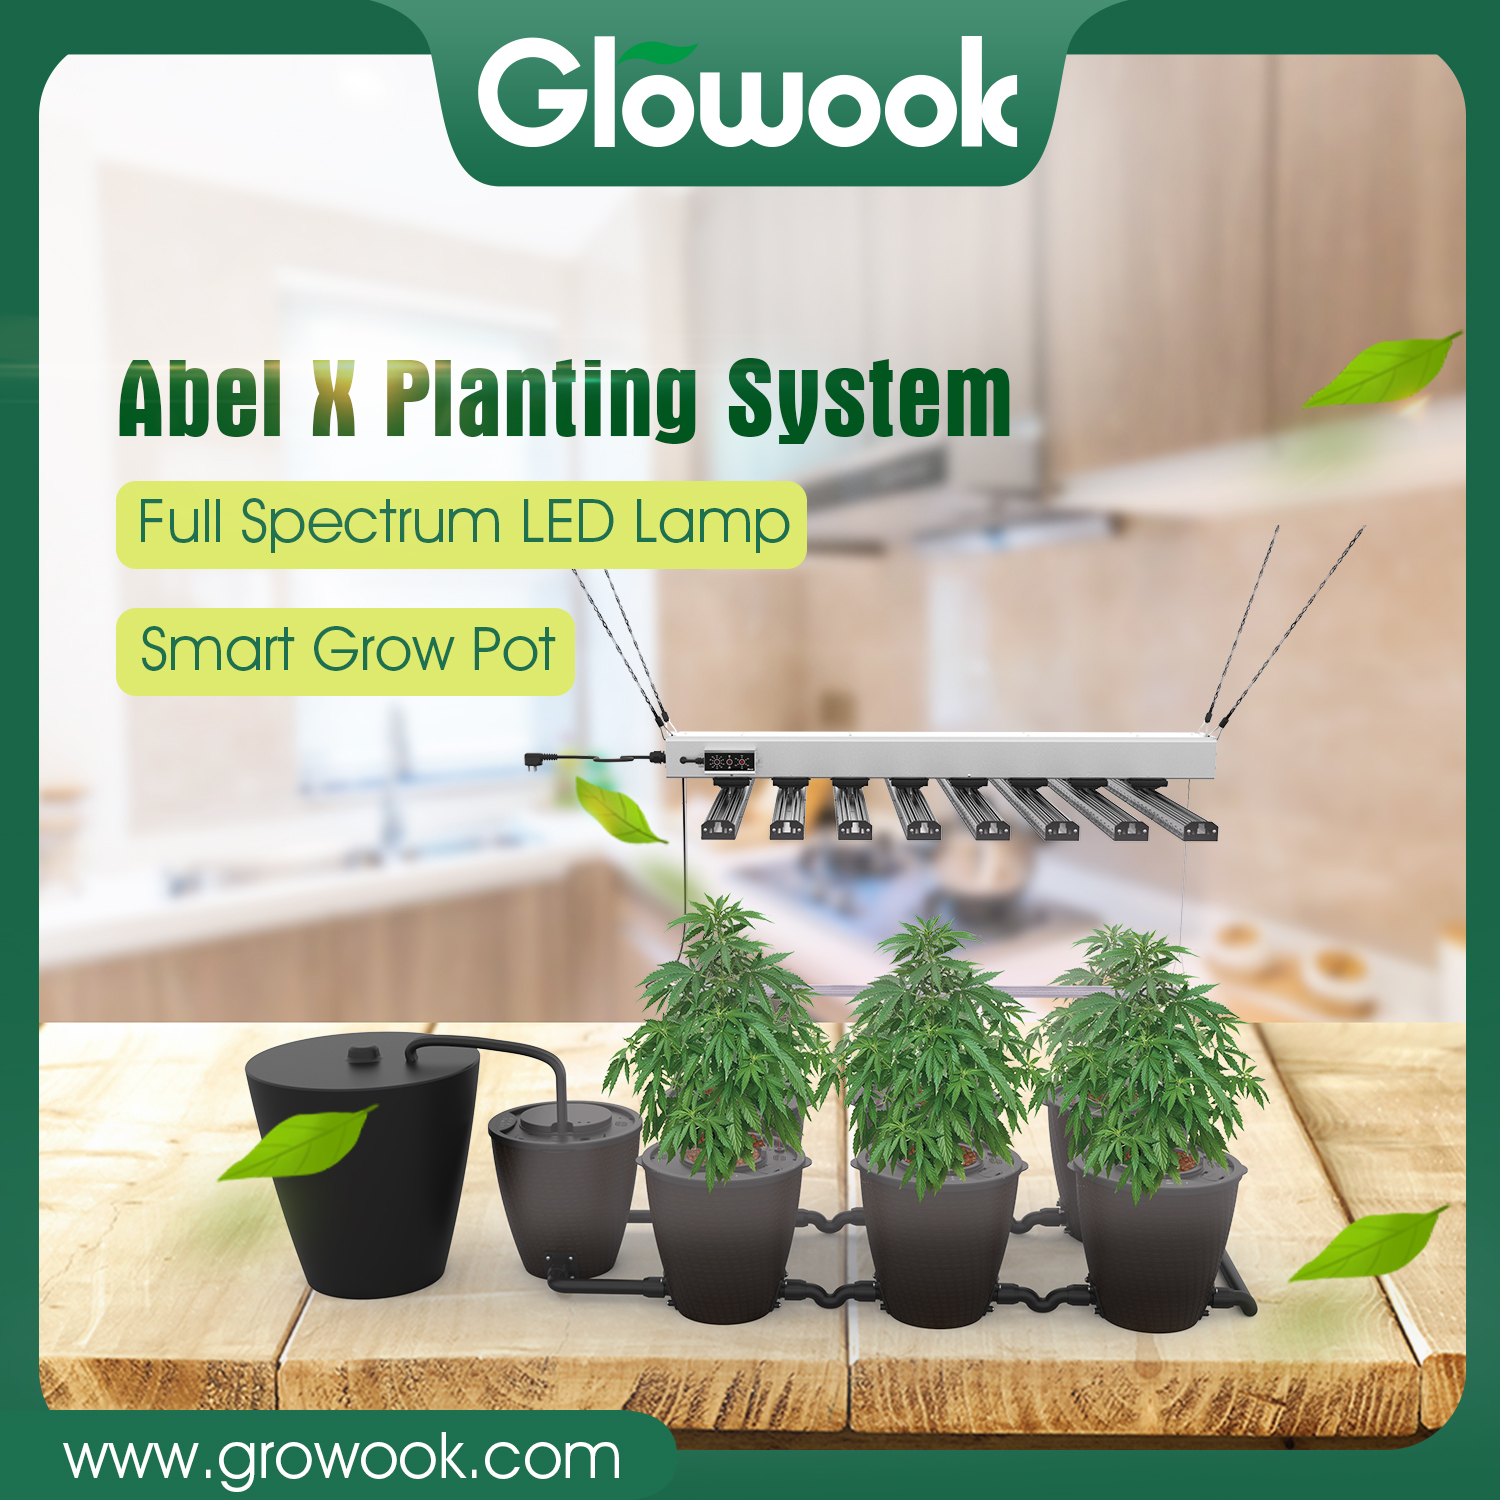 Abel X Planting System Featured Image